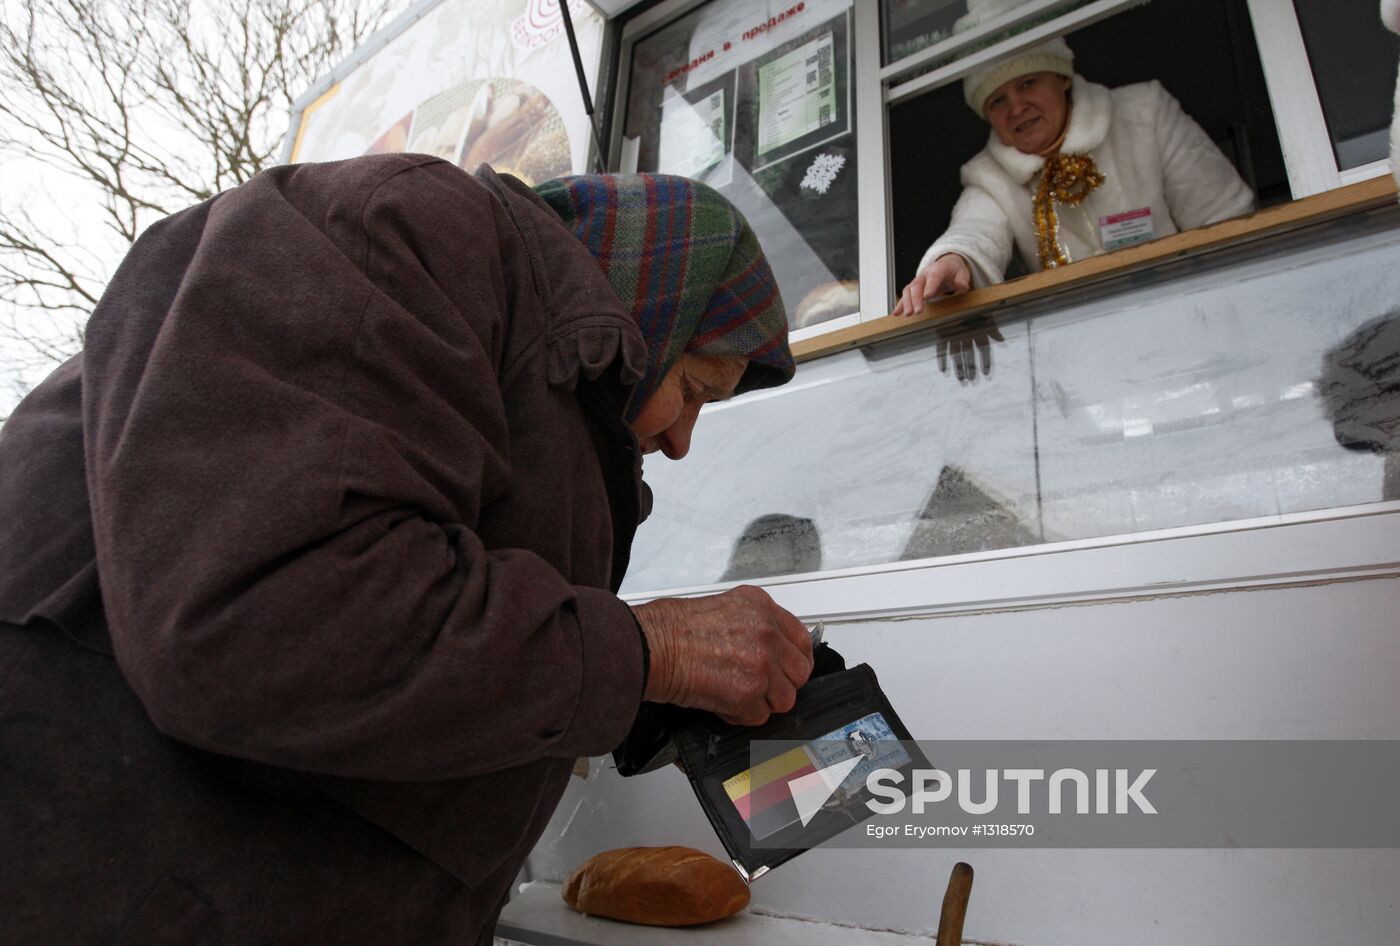 Shop on wheels with Ded Moroz